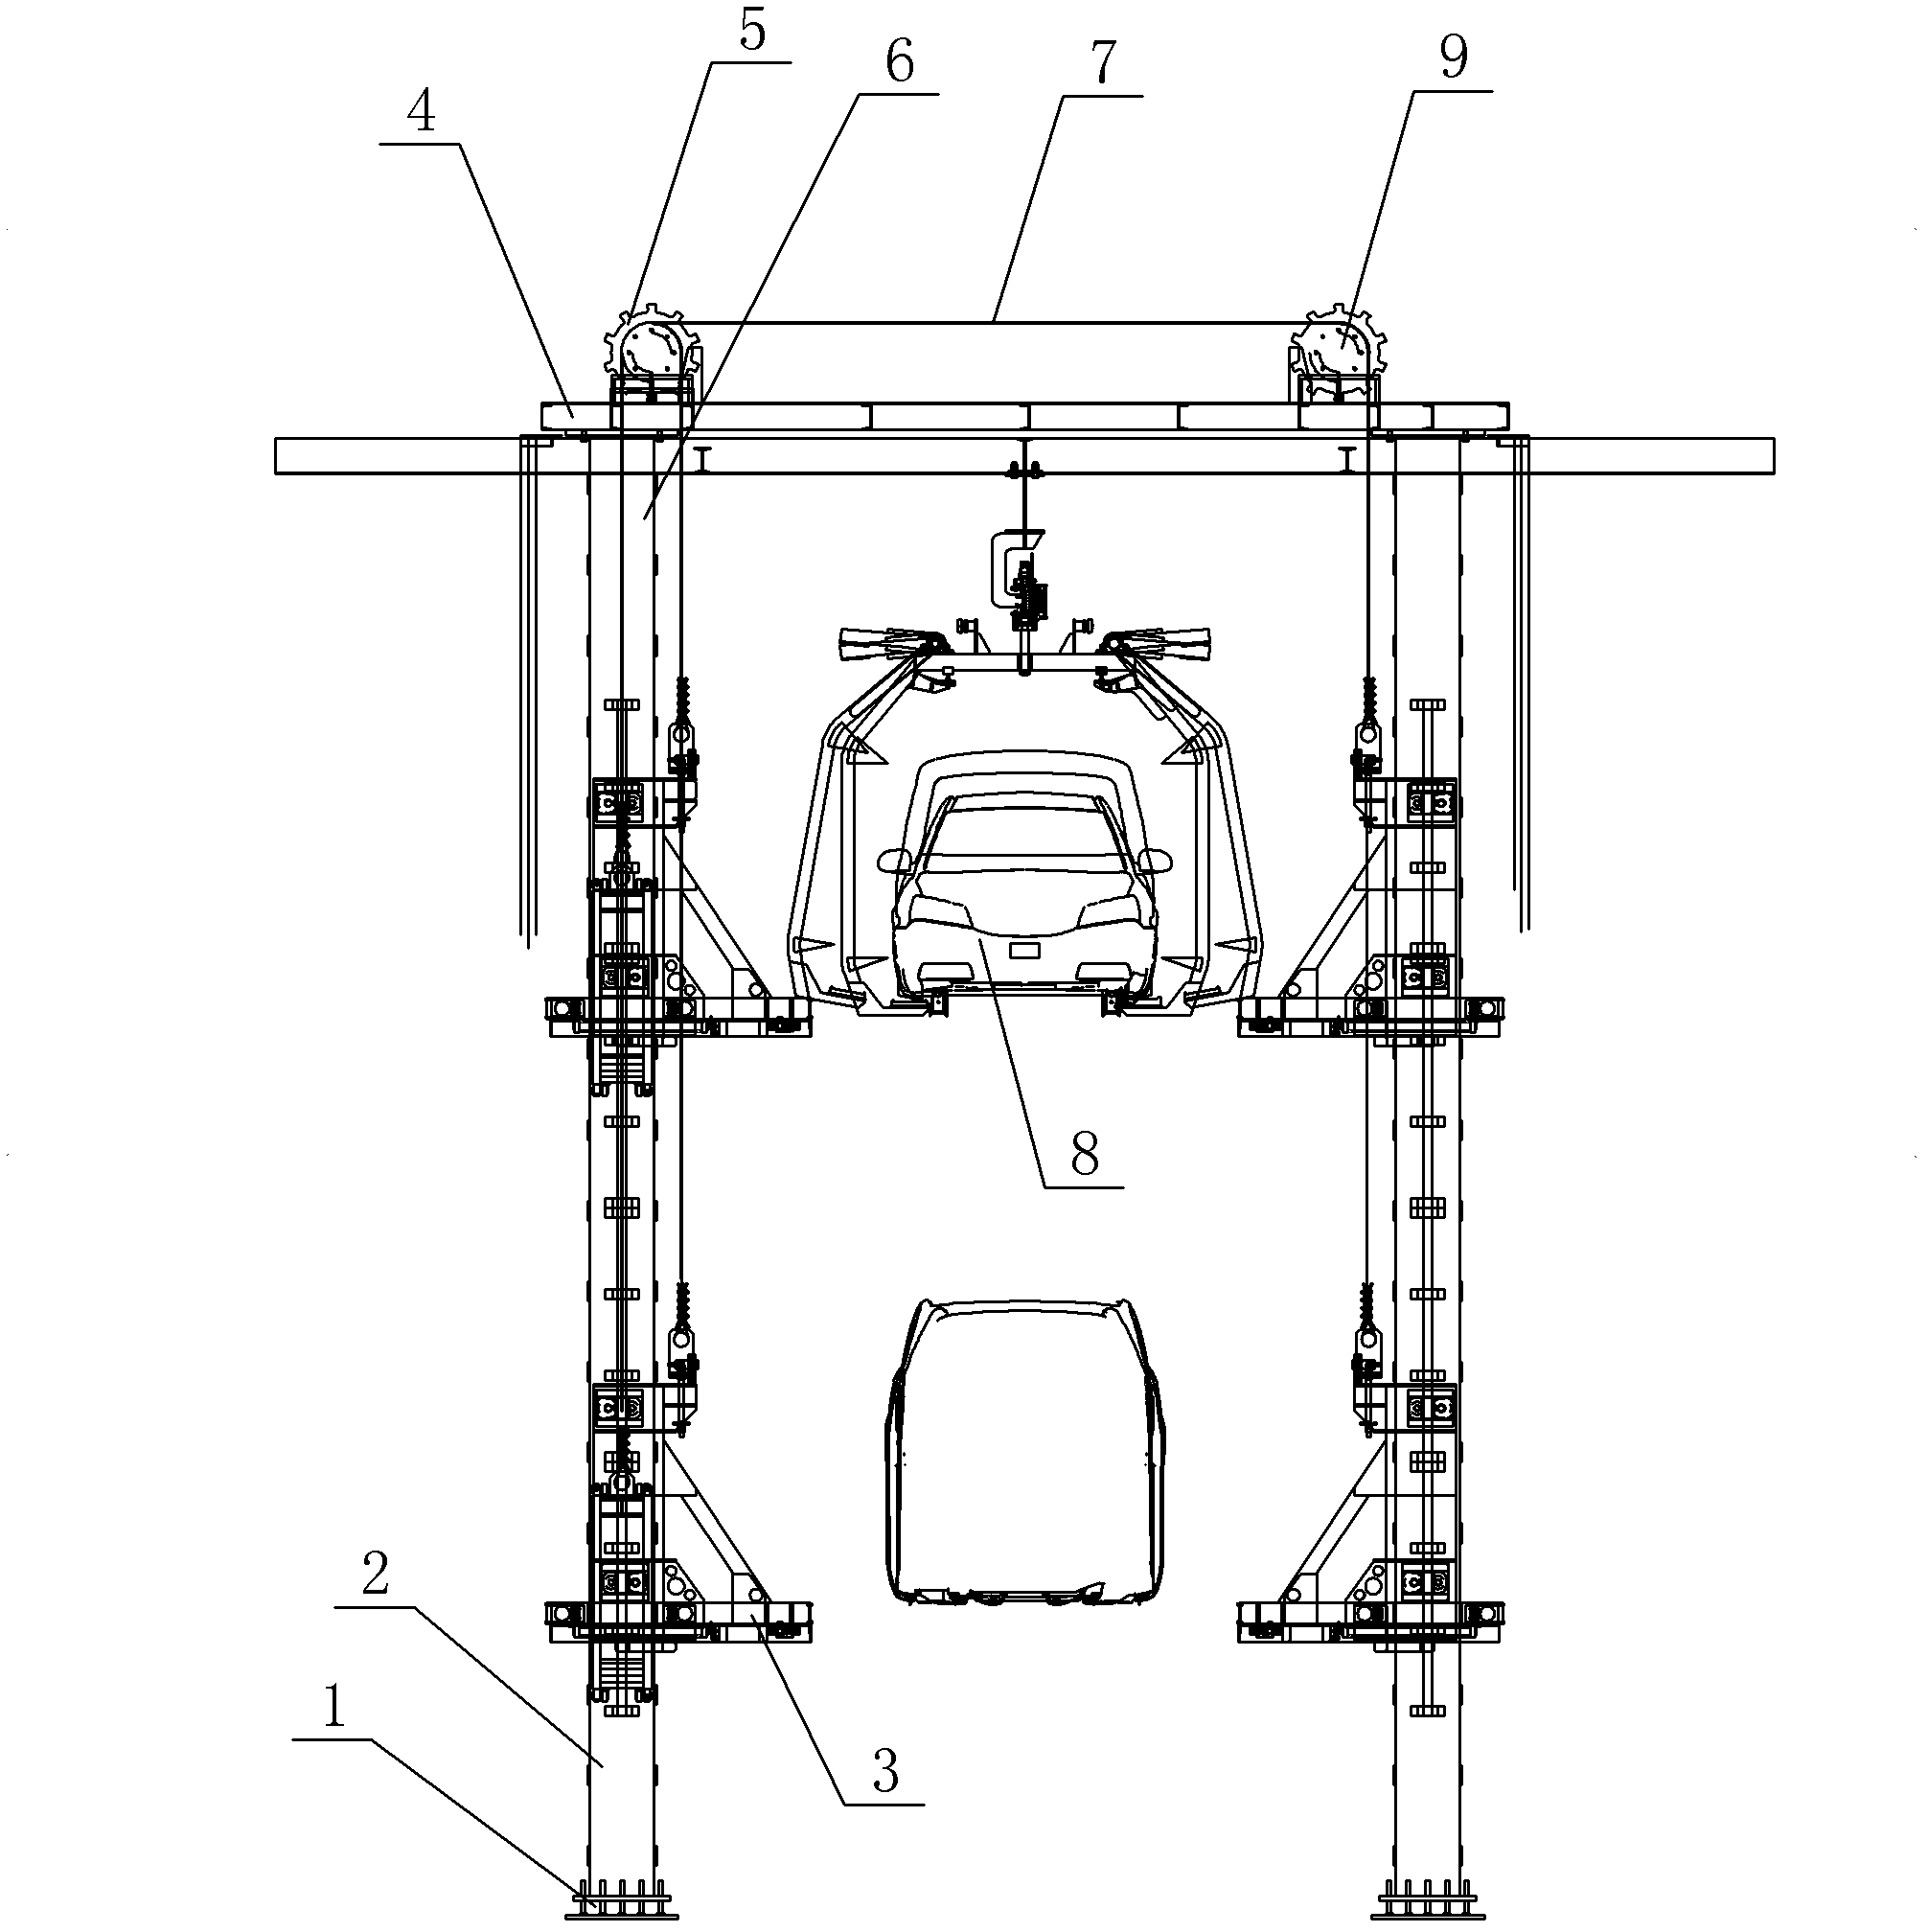 Two-vertical-column belt lifter capable of separating workpiece from rail to realize transshipment